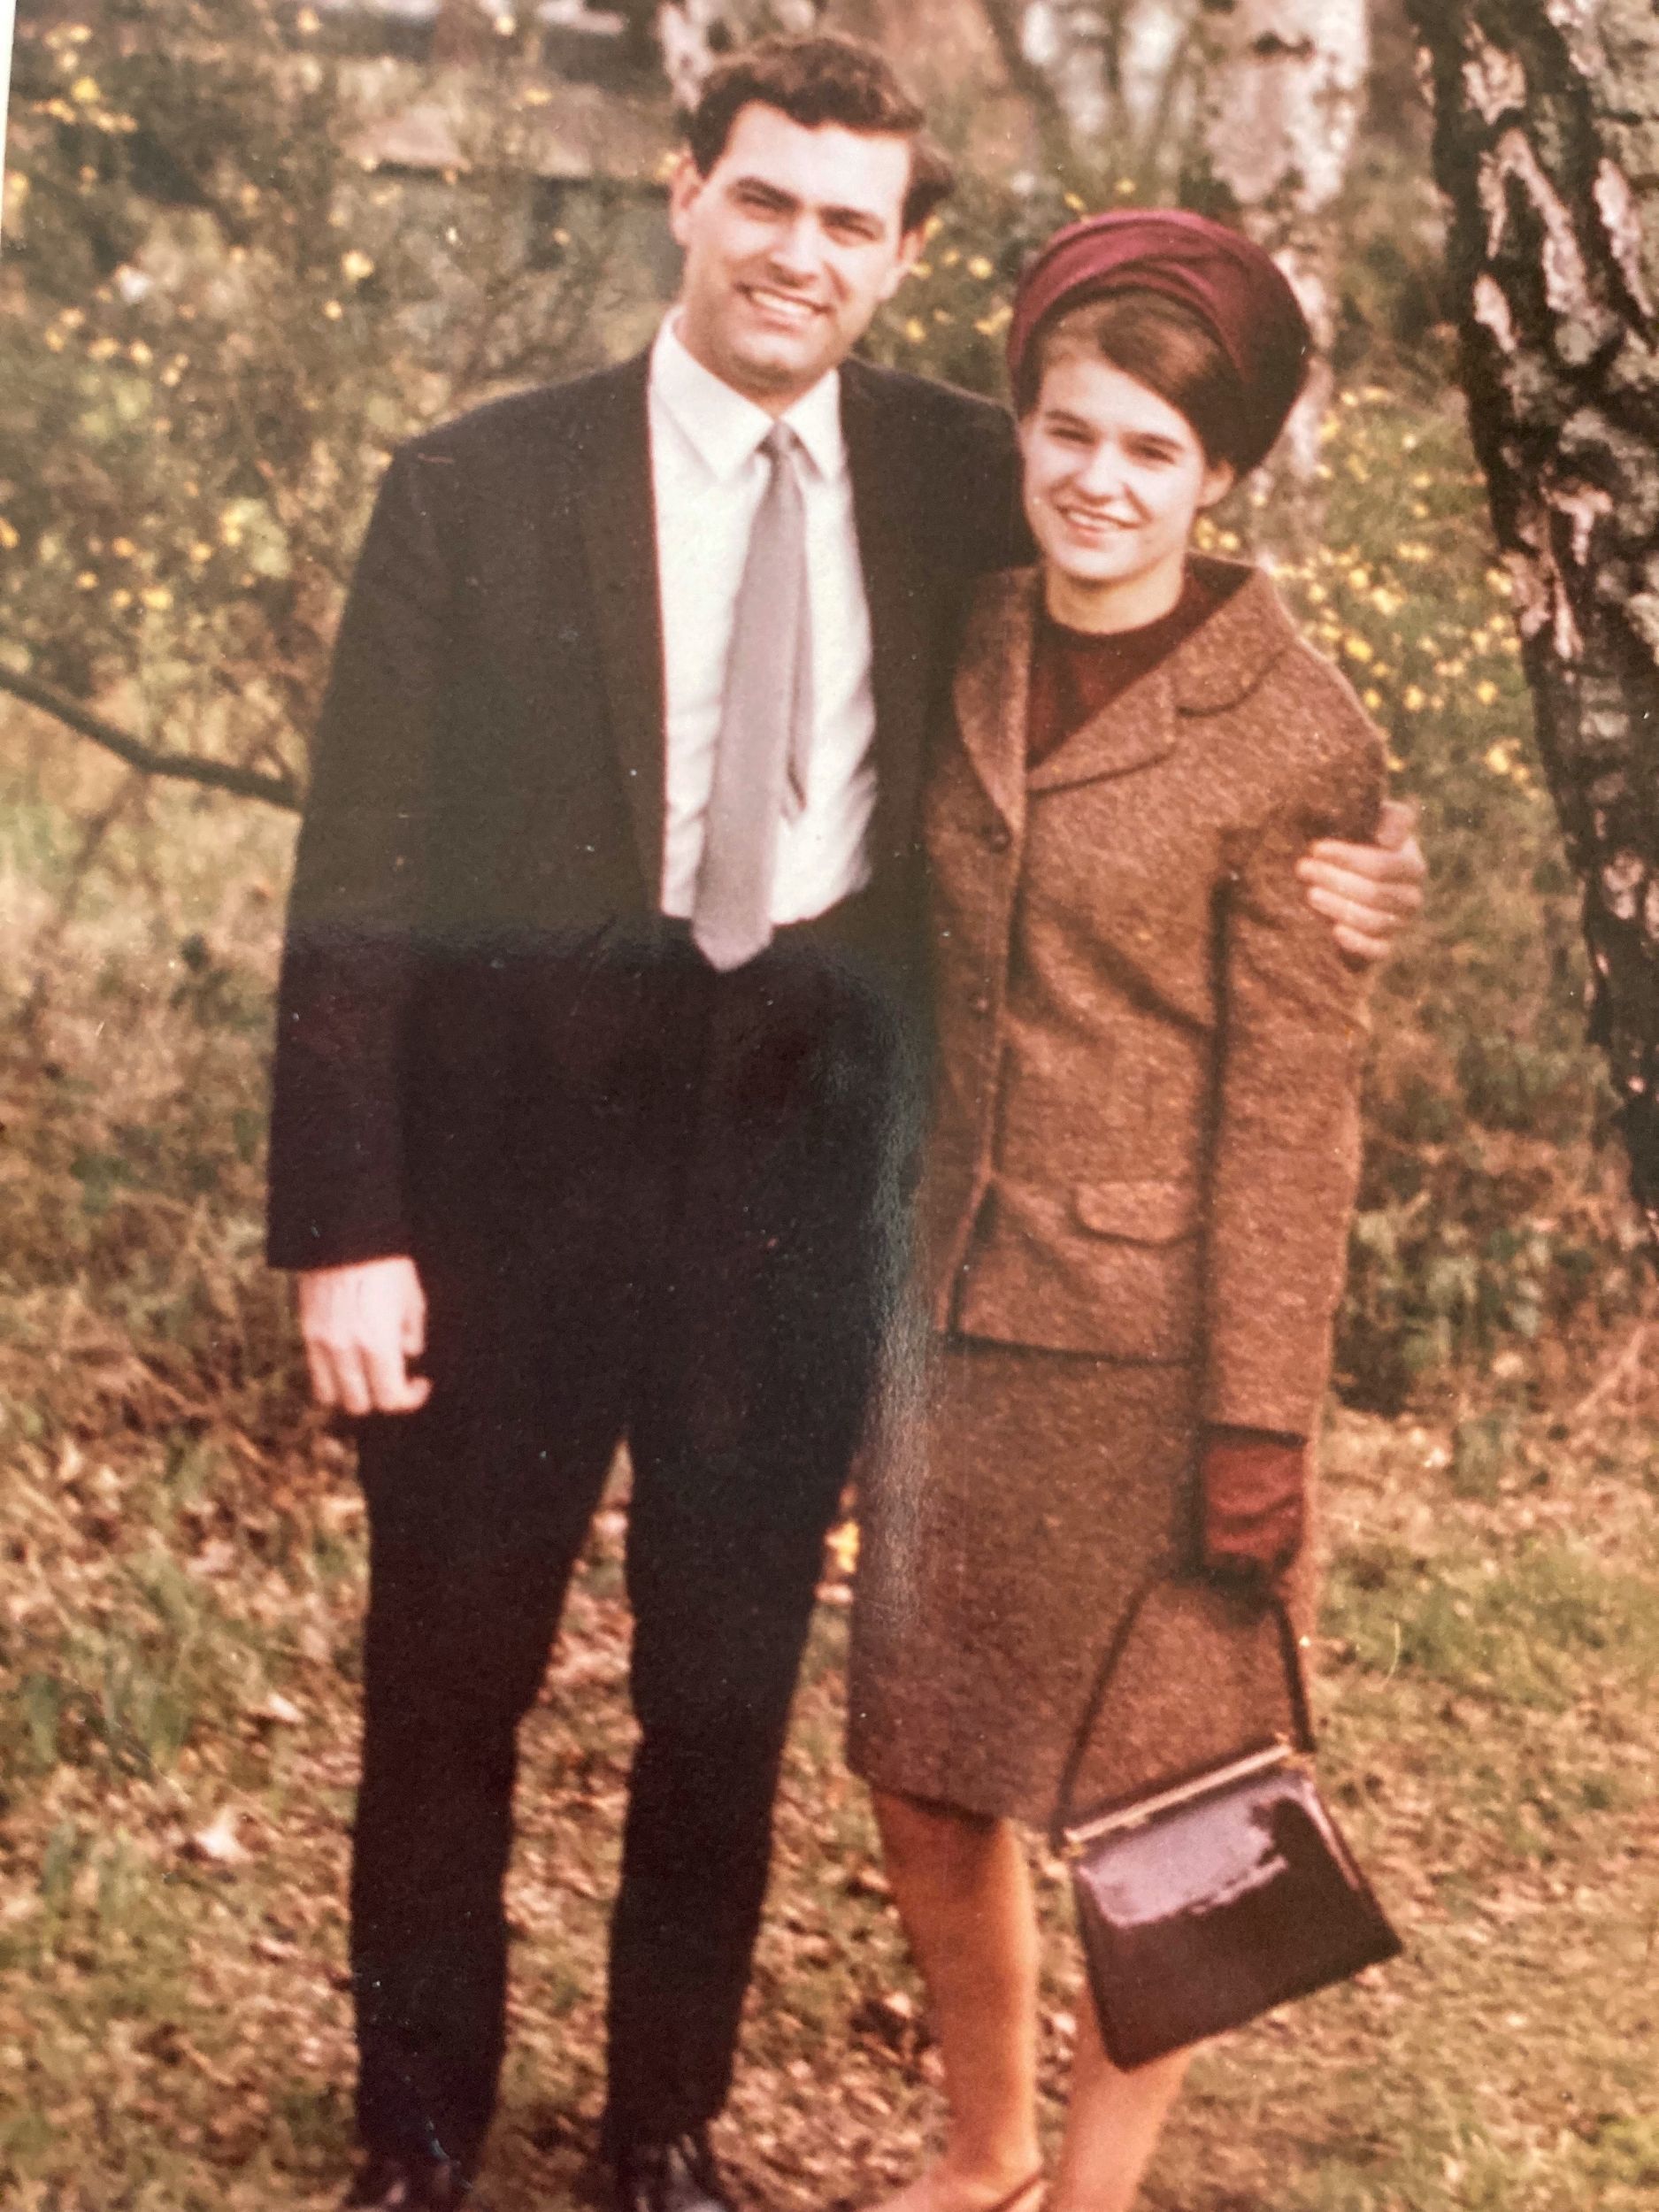 Vicki and her husband Keith in their younger years